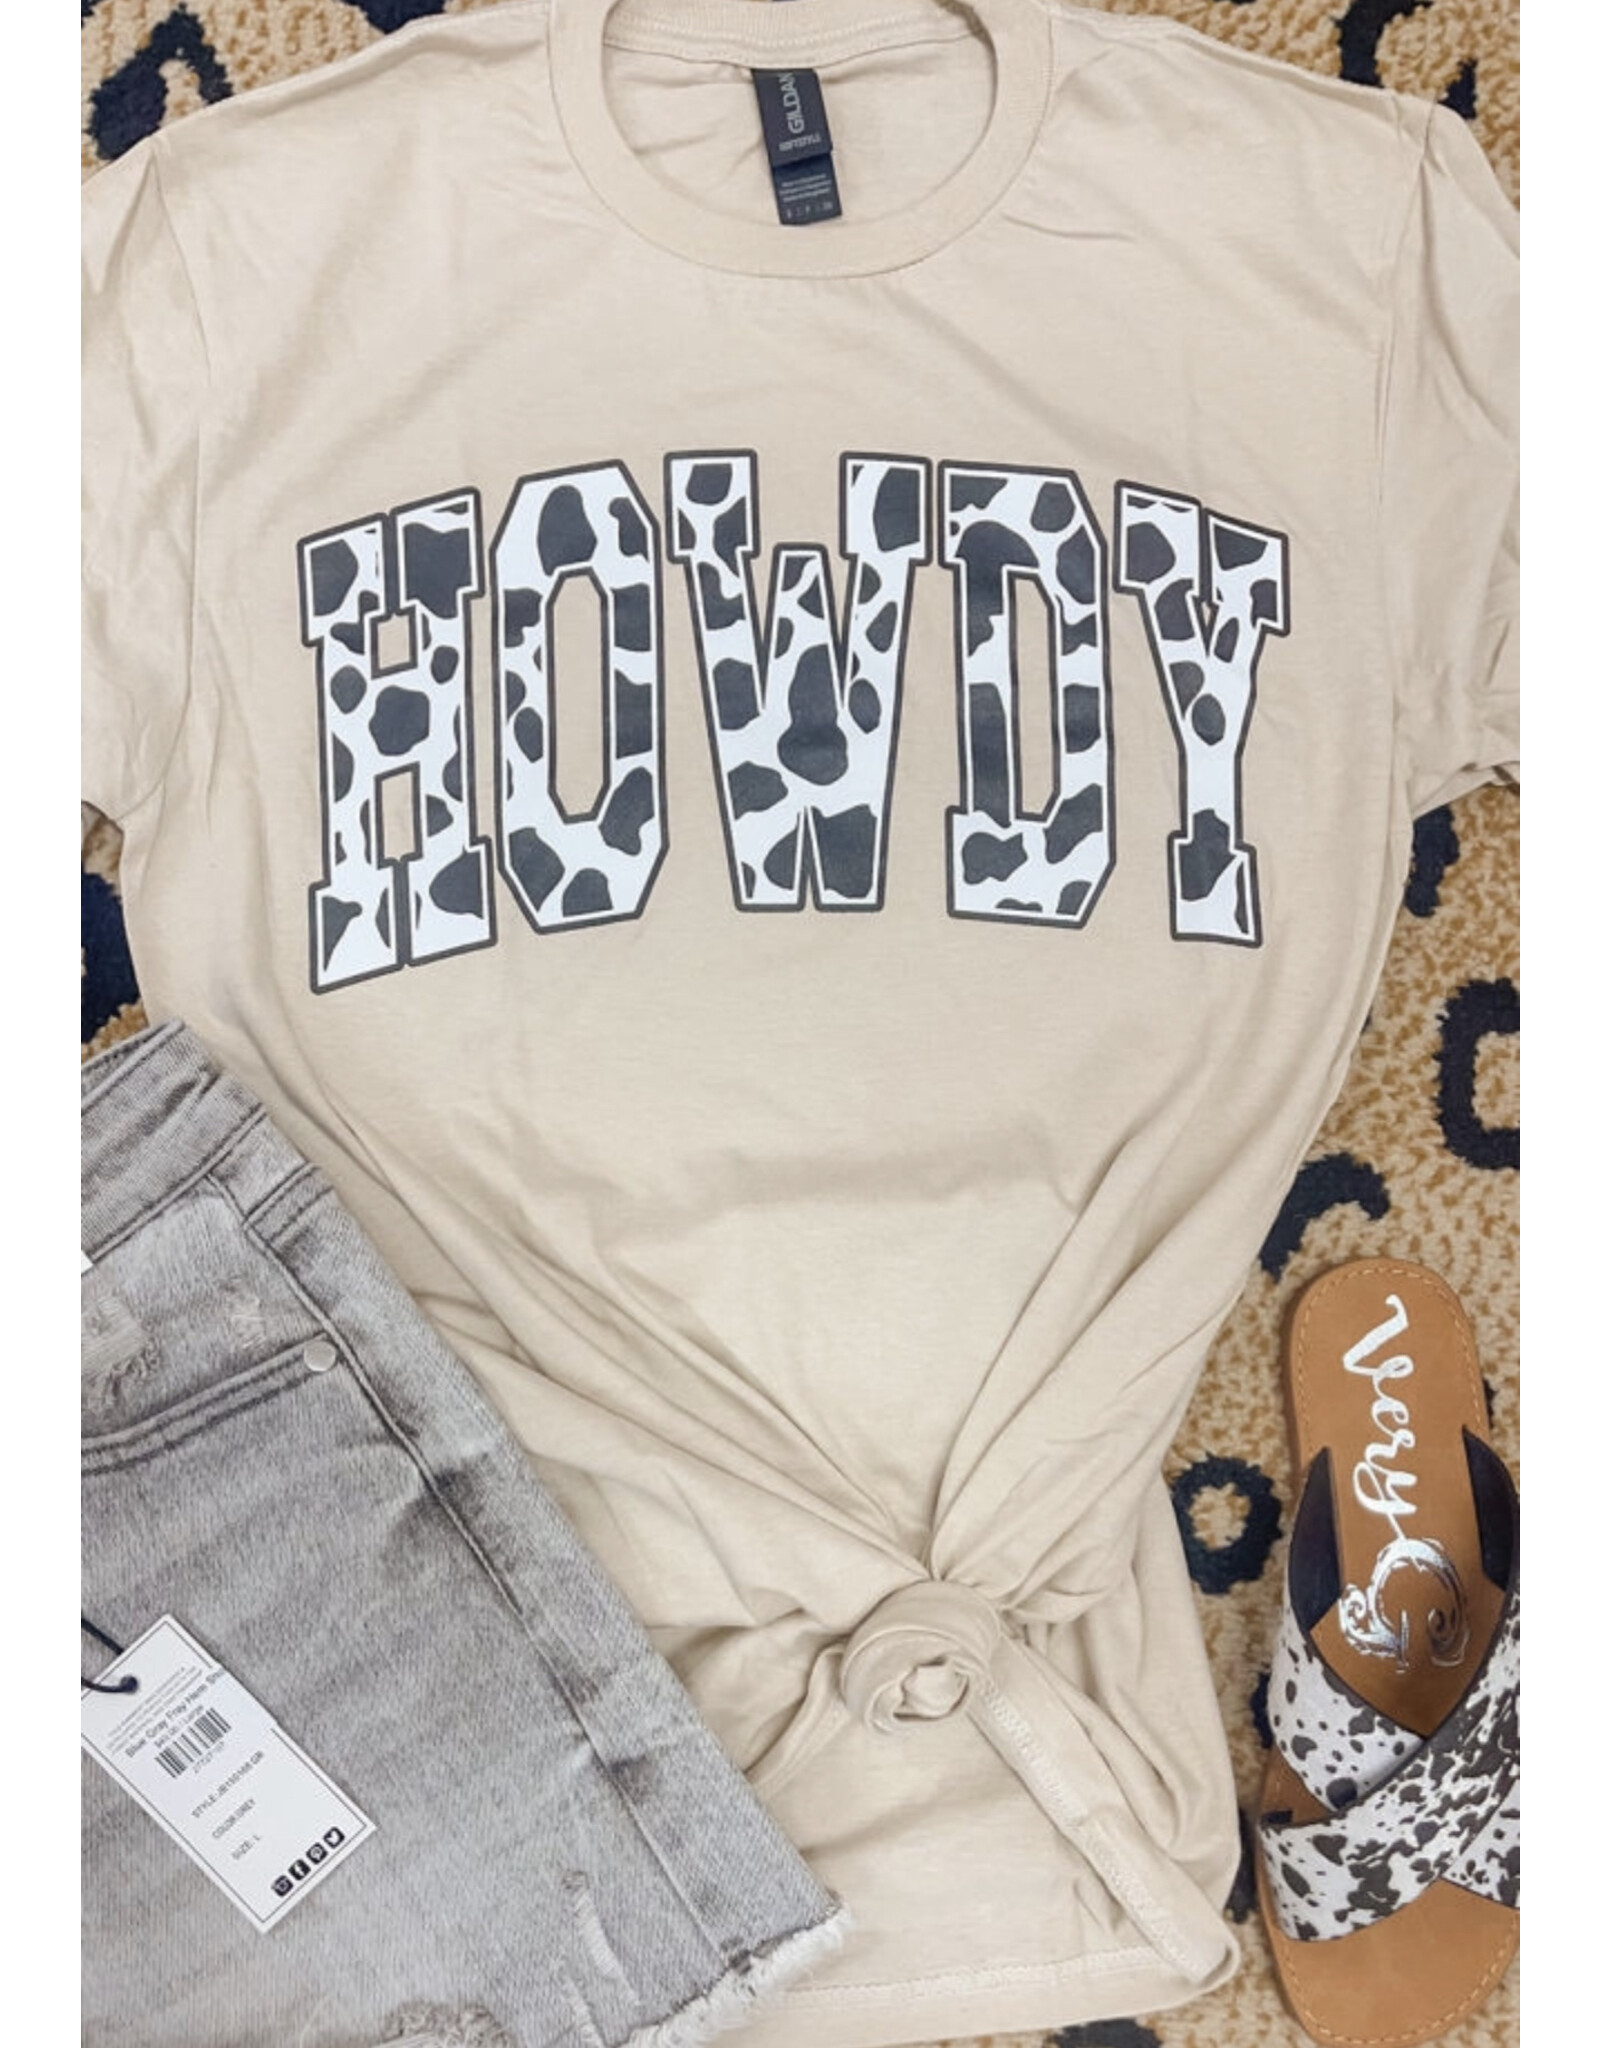 The Ritzy Gypsy HOWDY Graphic Tee